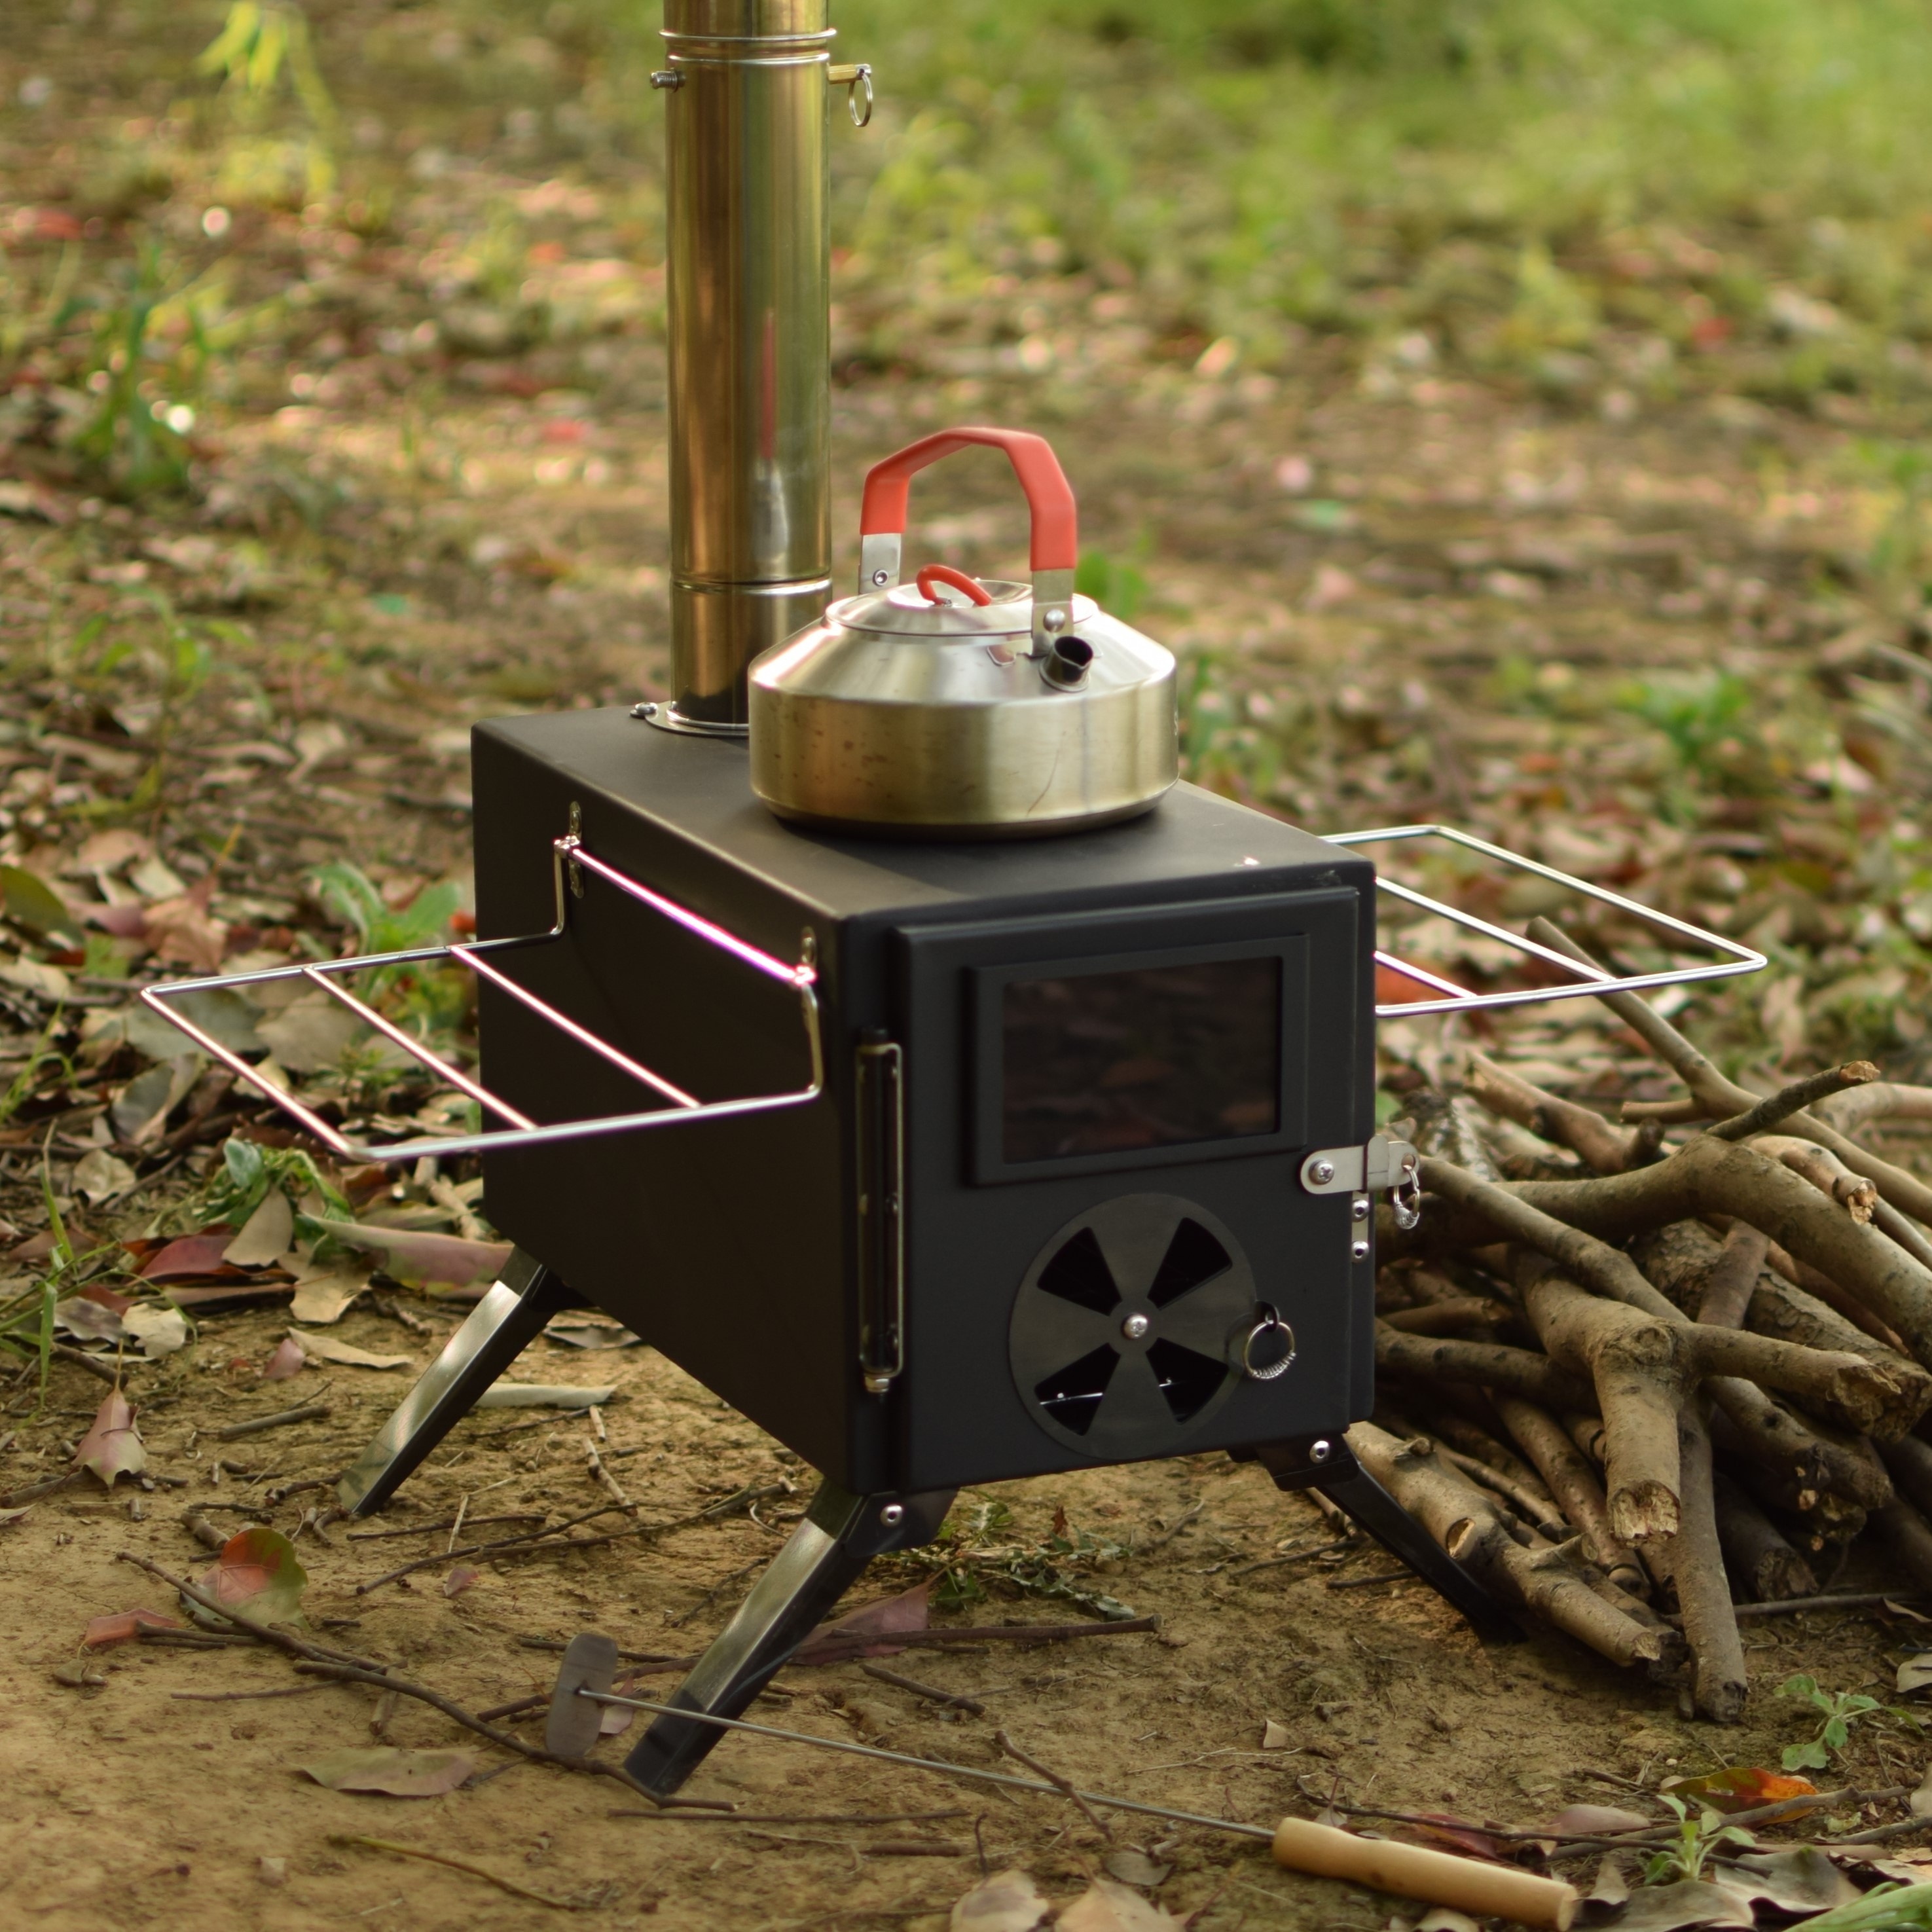 OXO Outdoor Silicone Camp Stove Turner